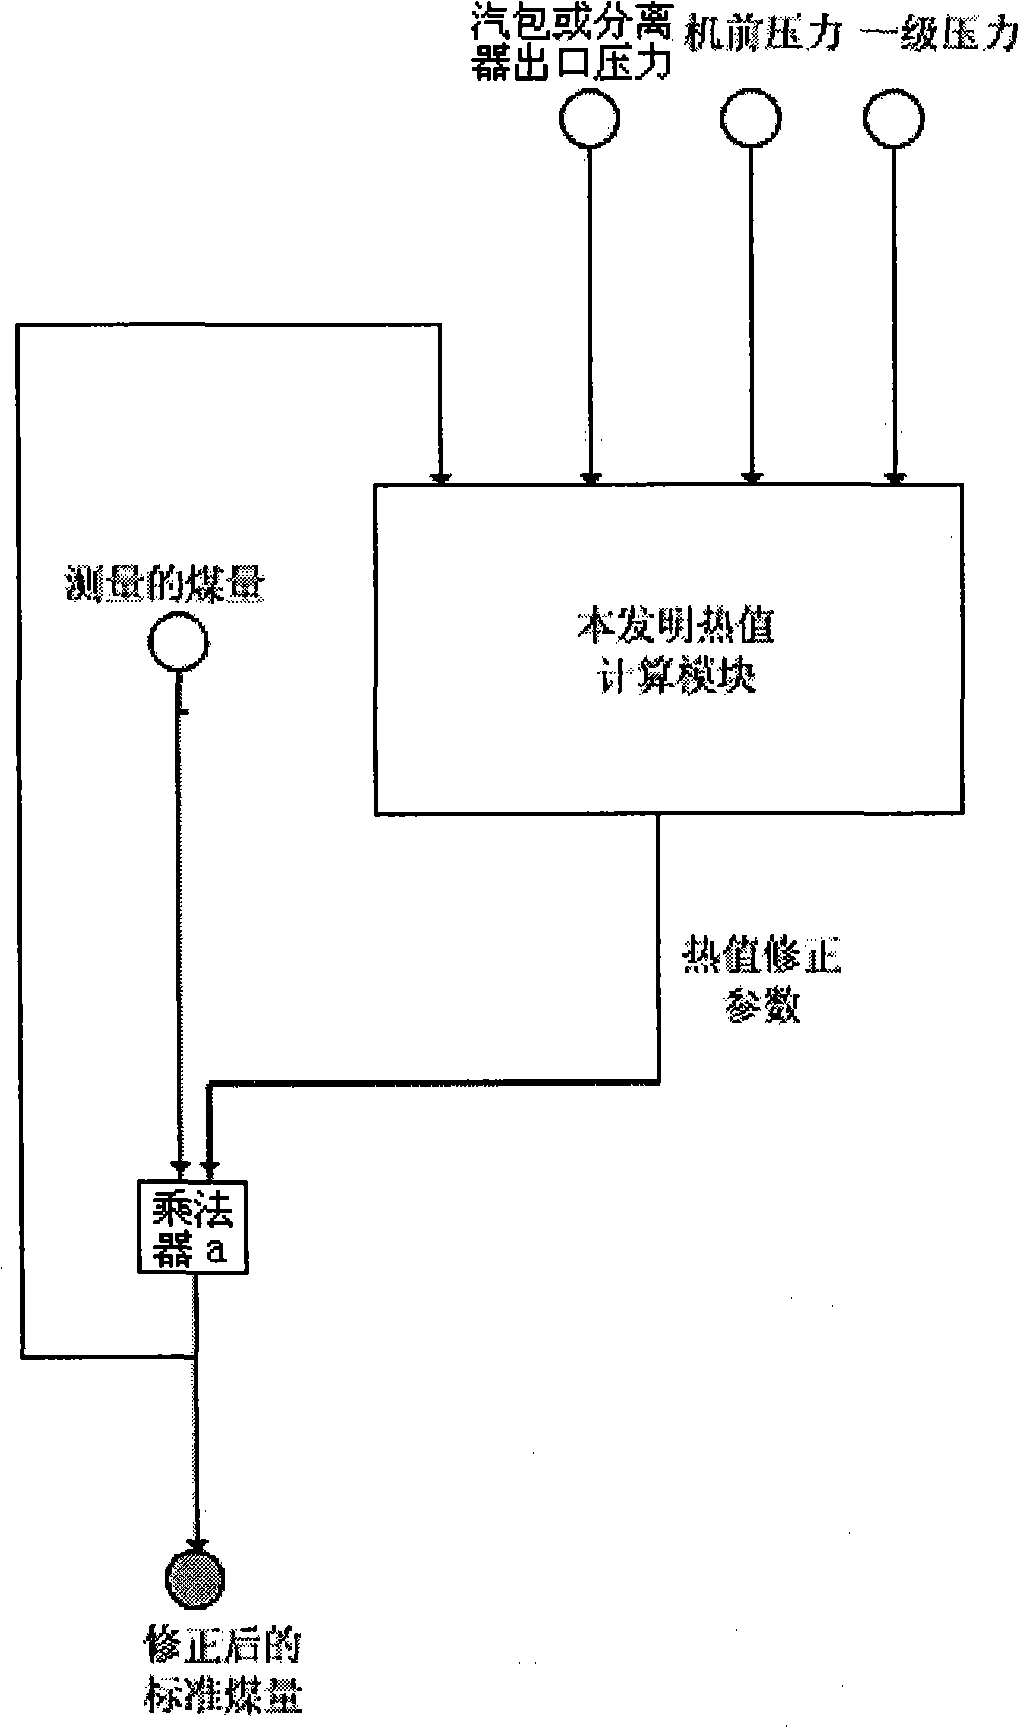 Thermal power unit coal-burning thermal value real time monitoring method and thermal value observer